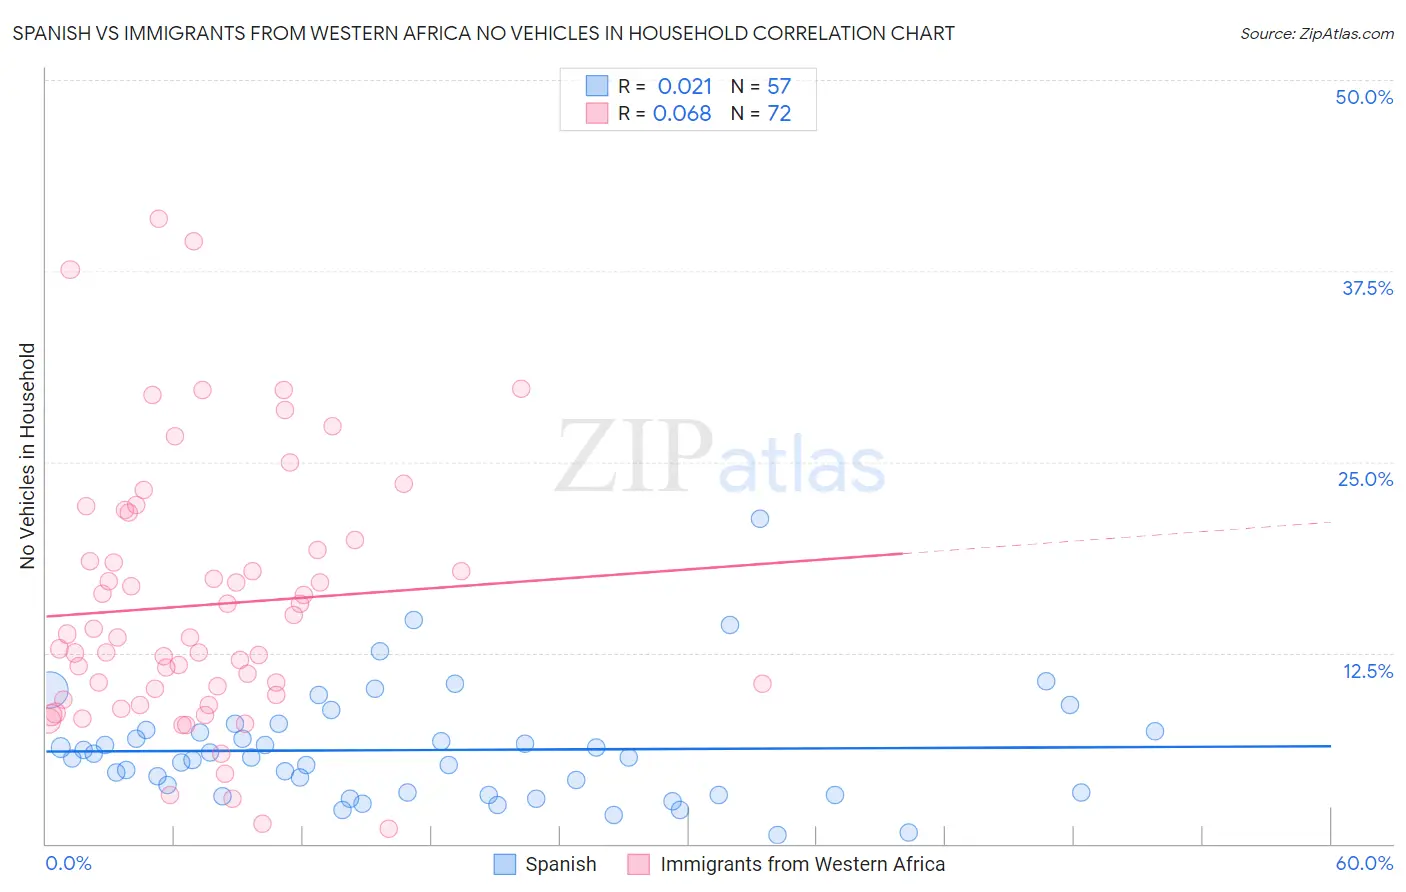 Spanish vs Immigrants from Western Africa No Vehicles in Household